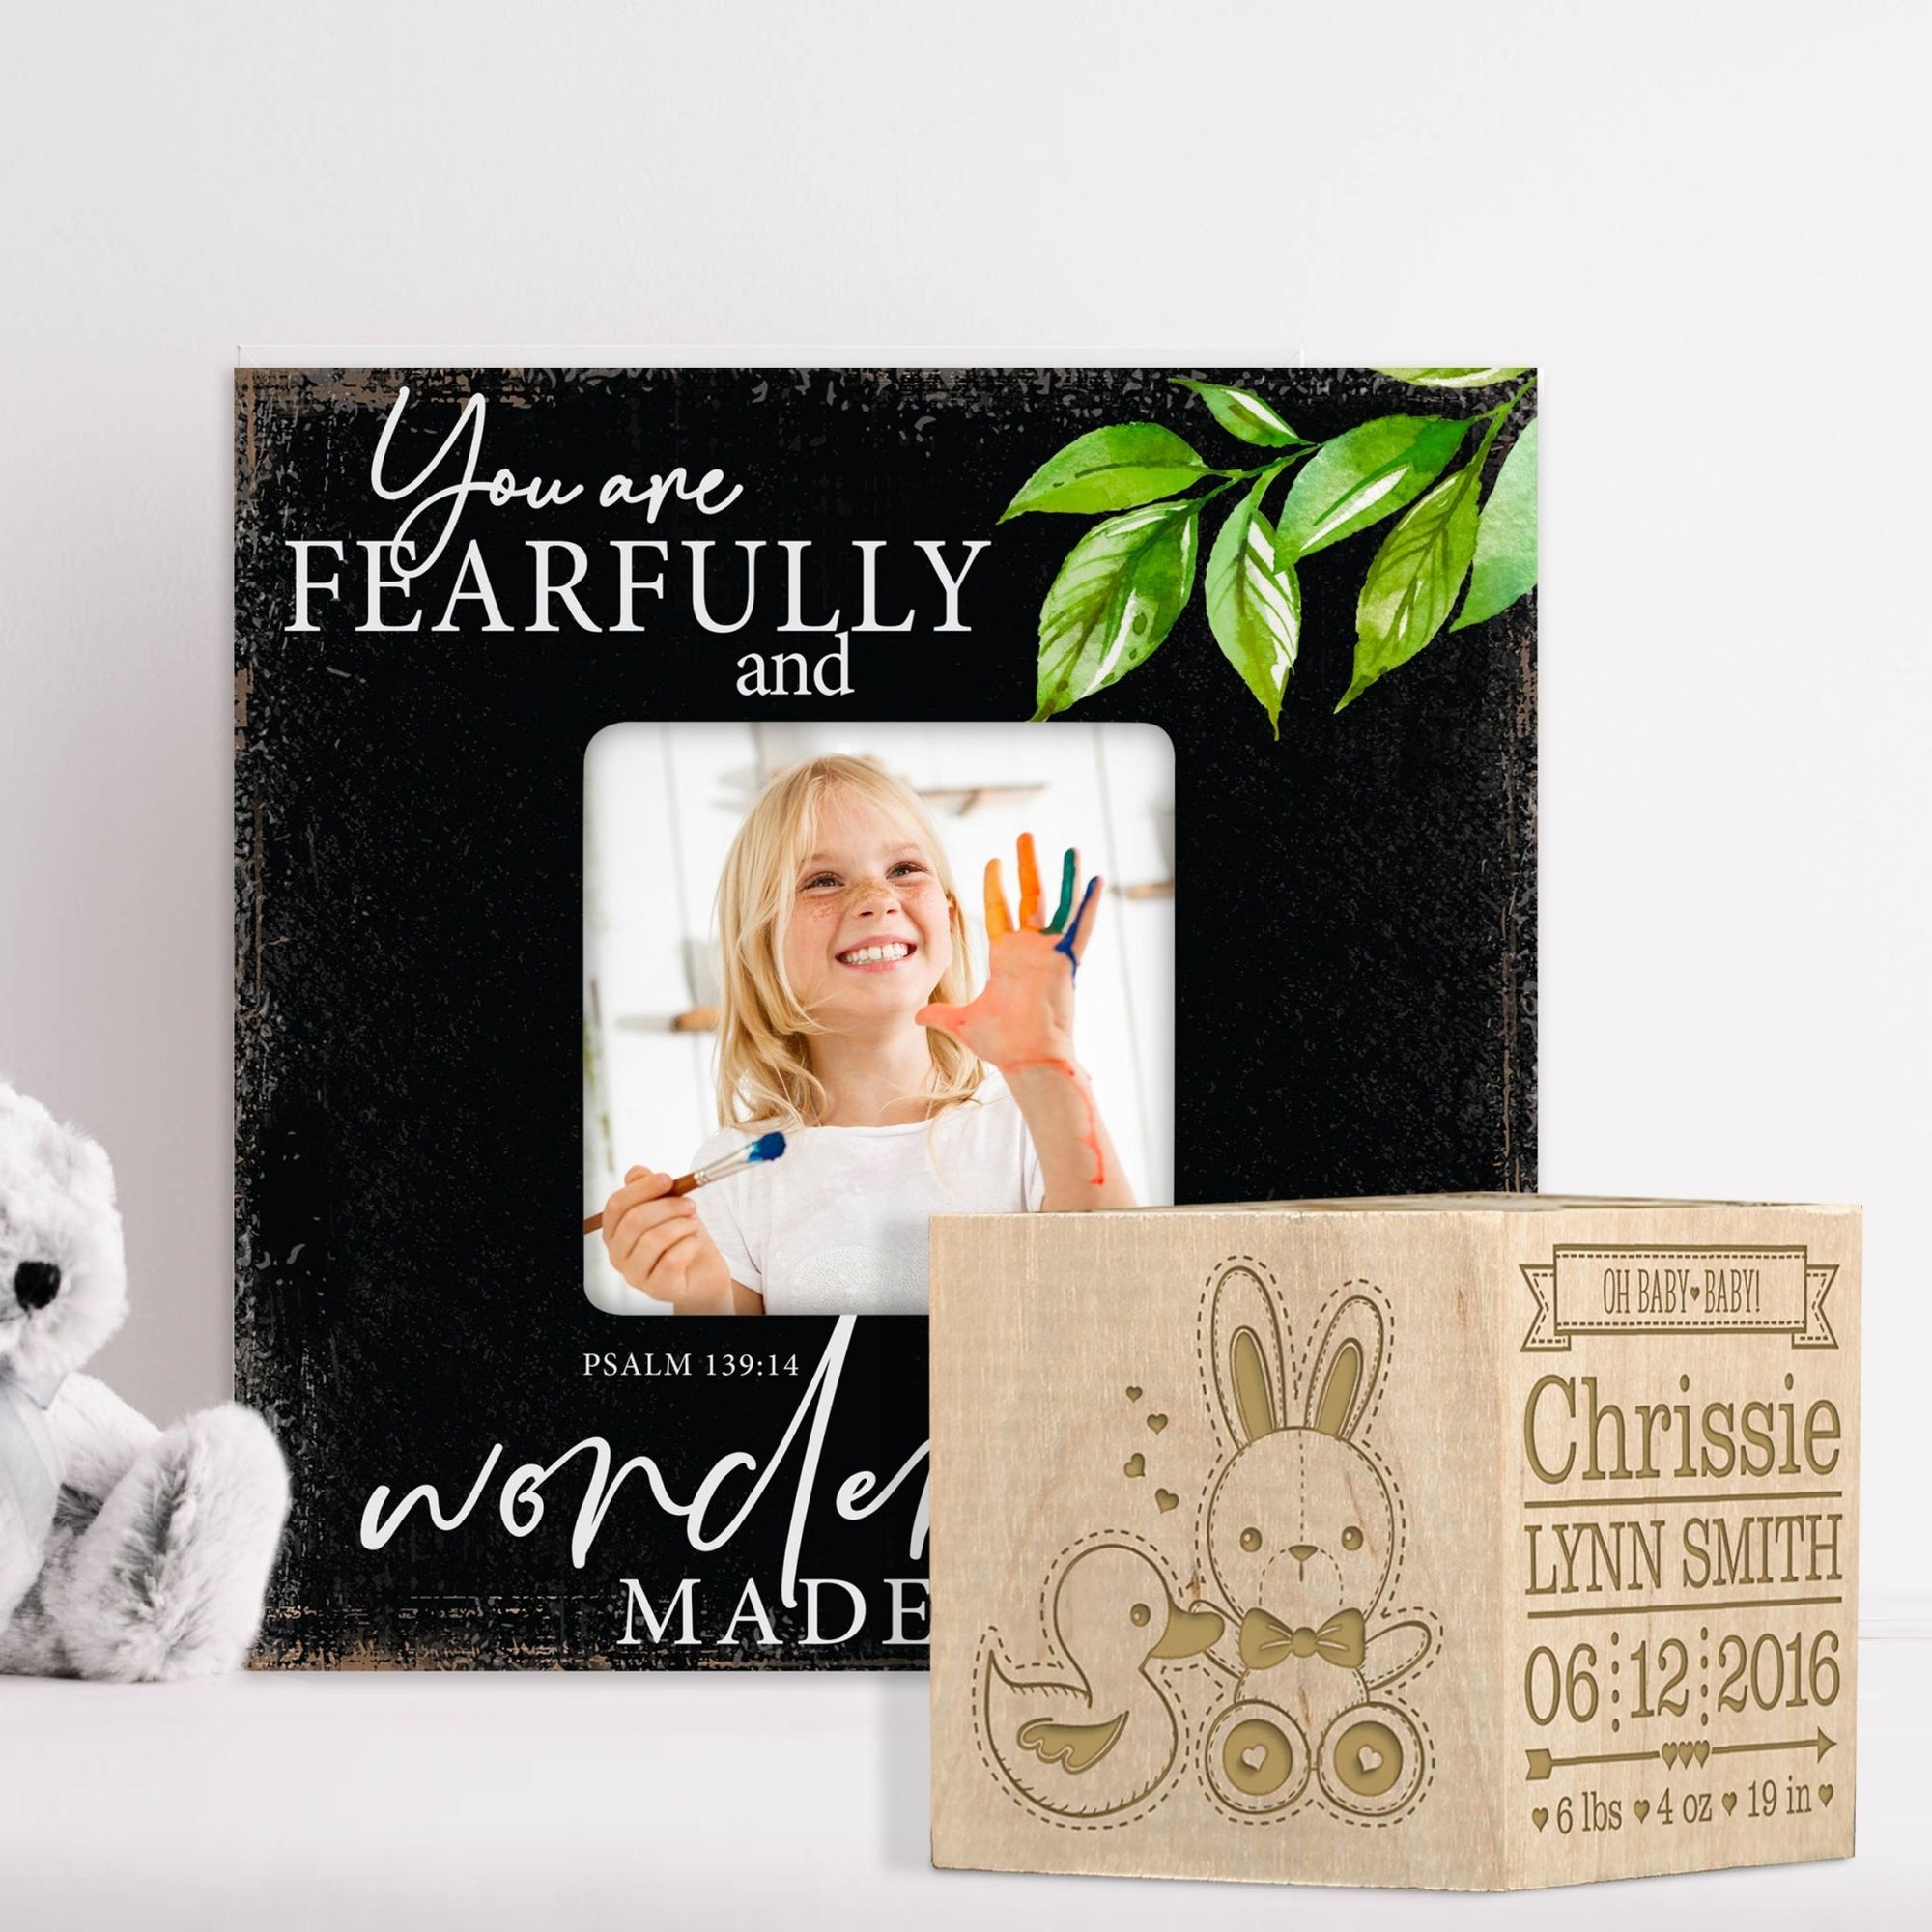 Personalized Baby Block - You Are My Sunshine - LifeSong Milestones